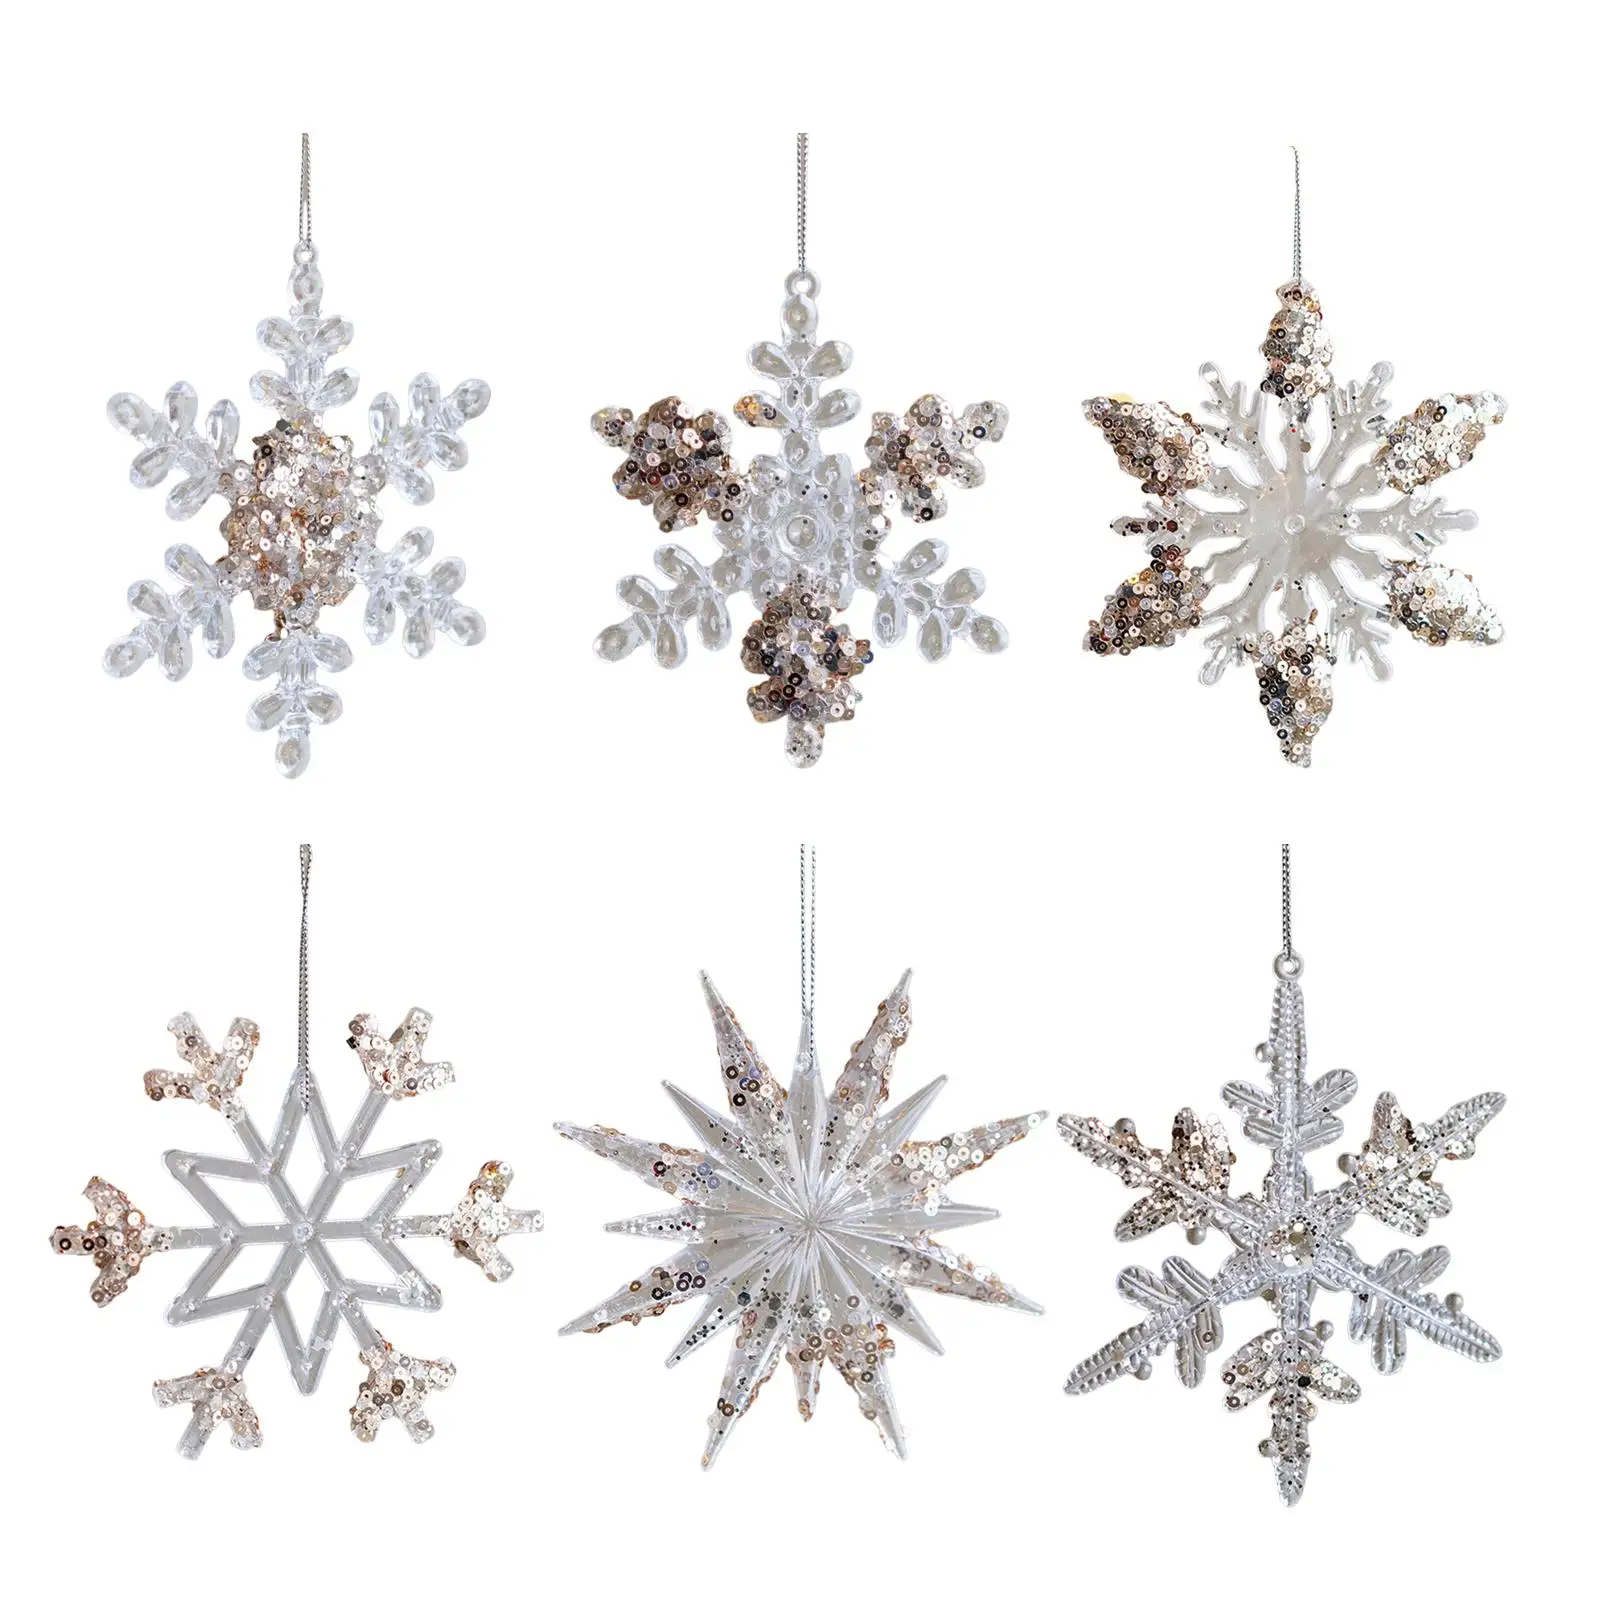 

Snowflake Pendants Xmas Ornaments DIY Holiday Decorations Christmas Tree Decorations for Winter Theme Party Home Family Kitchen